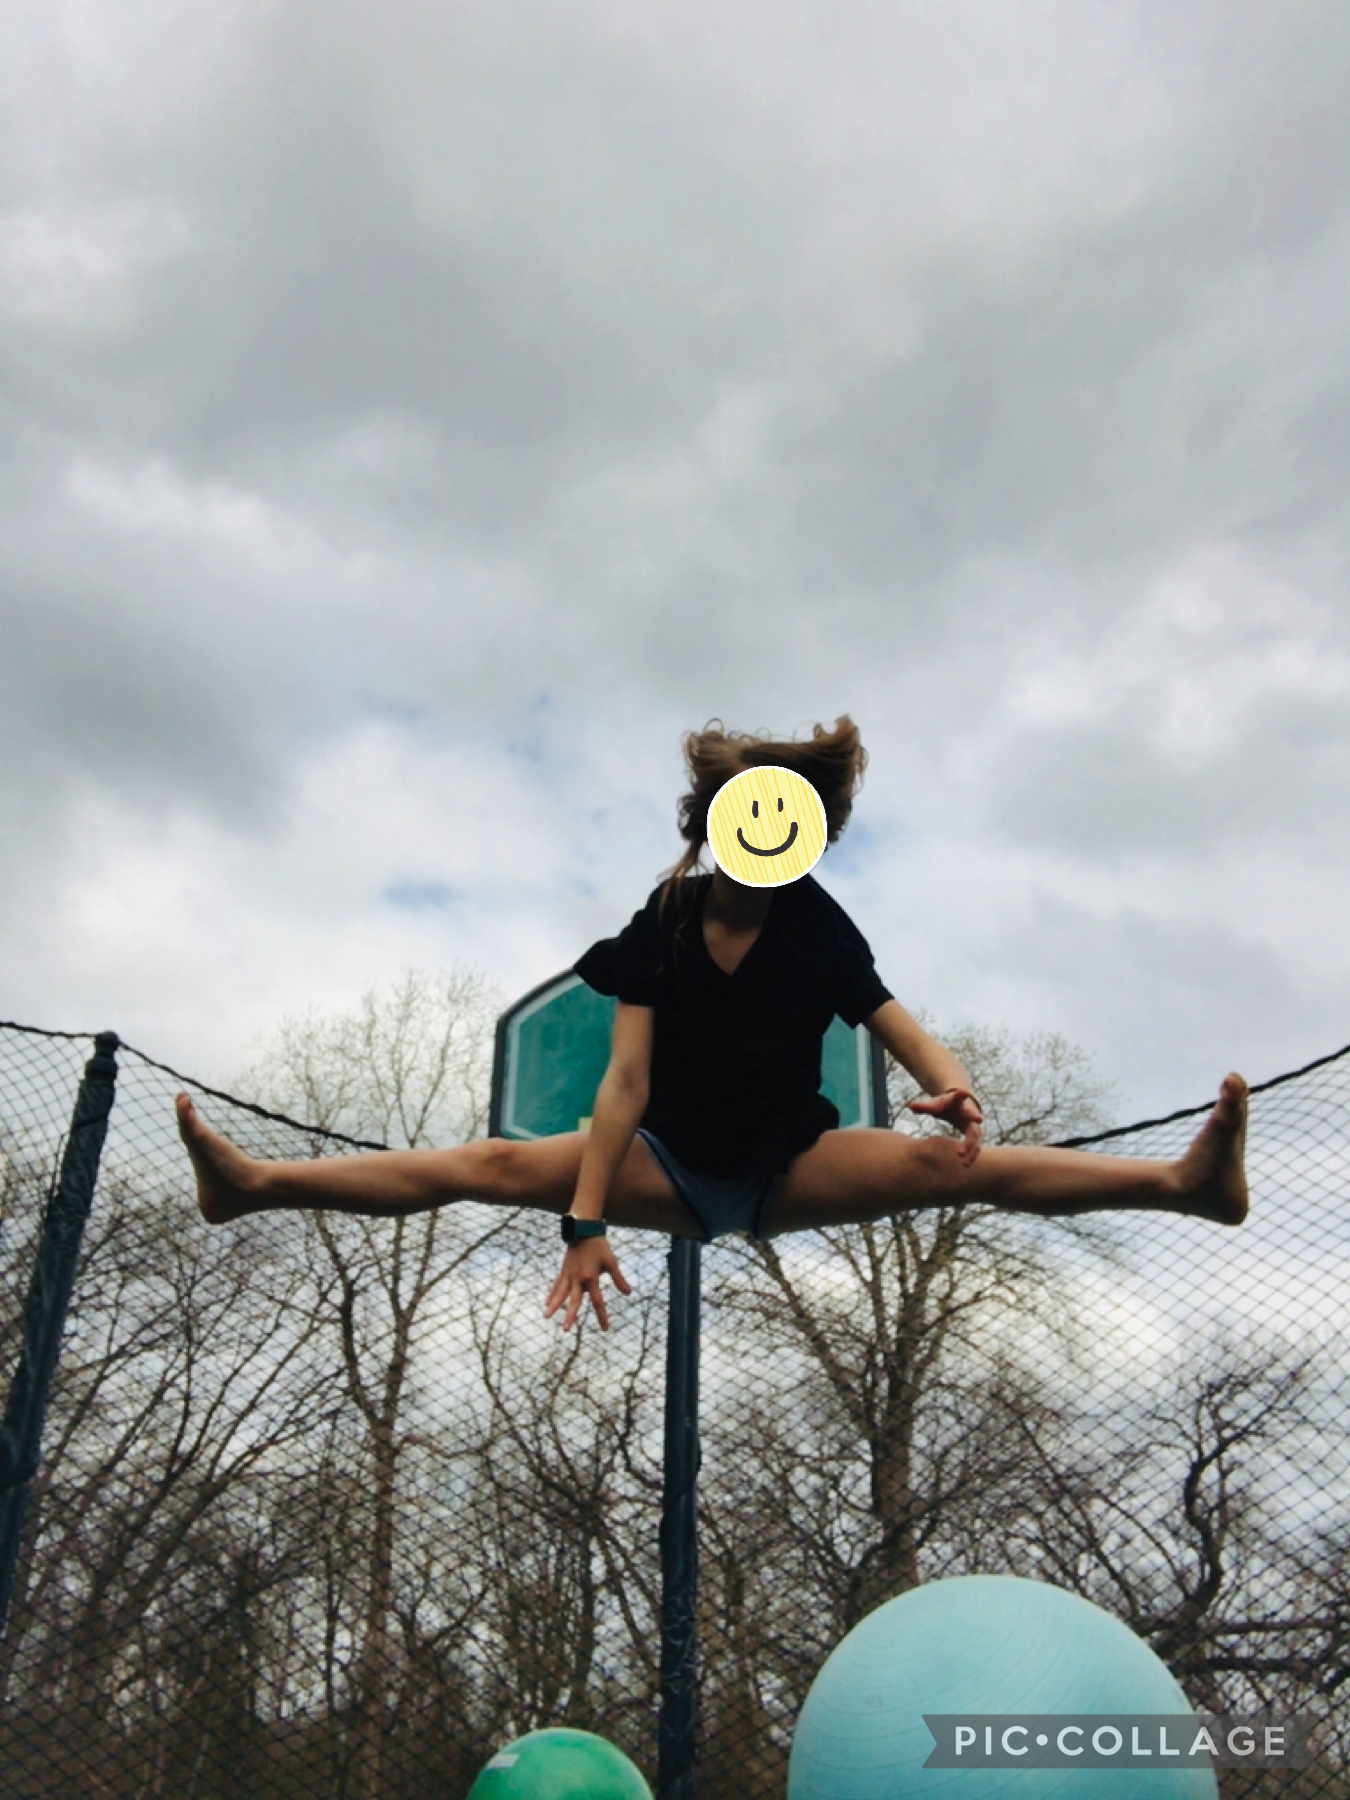 My best friend was jumping and I got a photo of her 